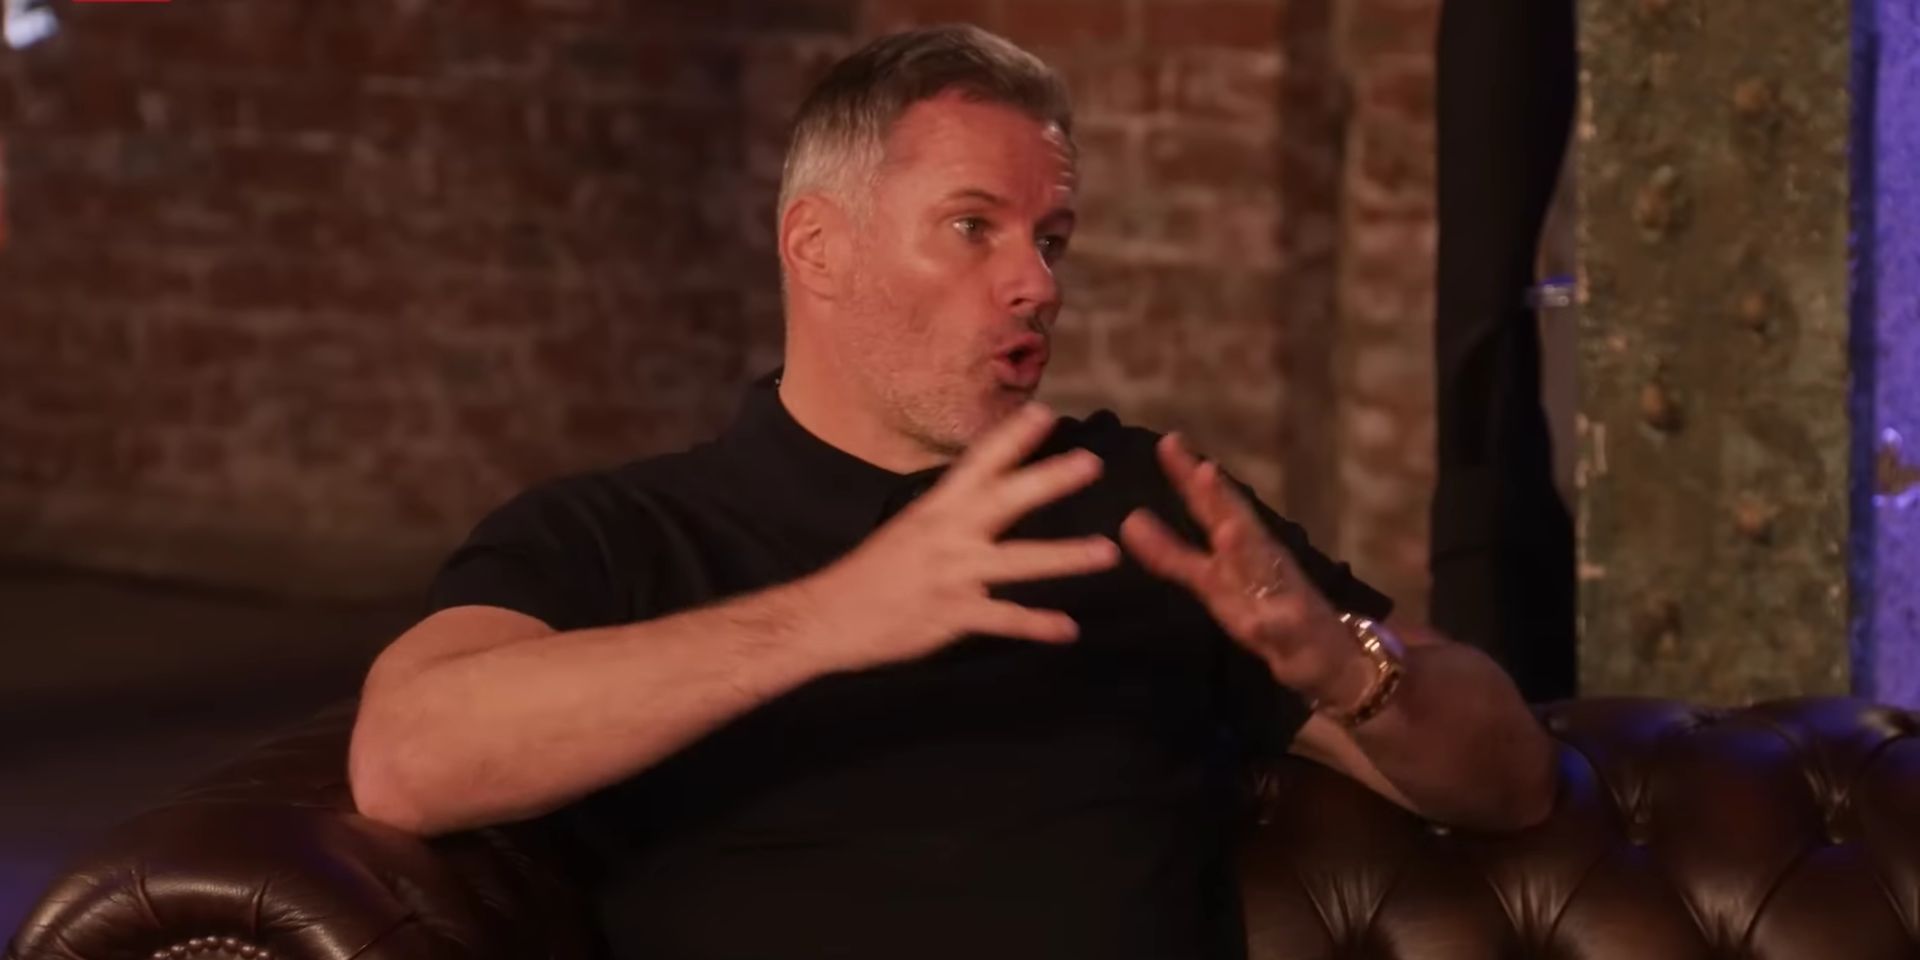 (Video) Carragher questions the motives behind FSG’s timing on selling the club